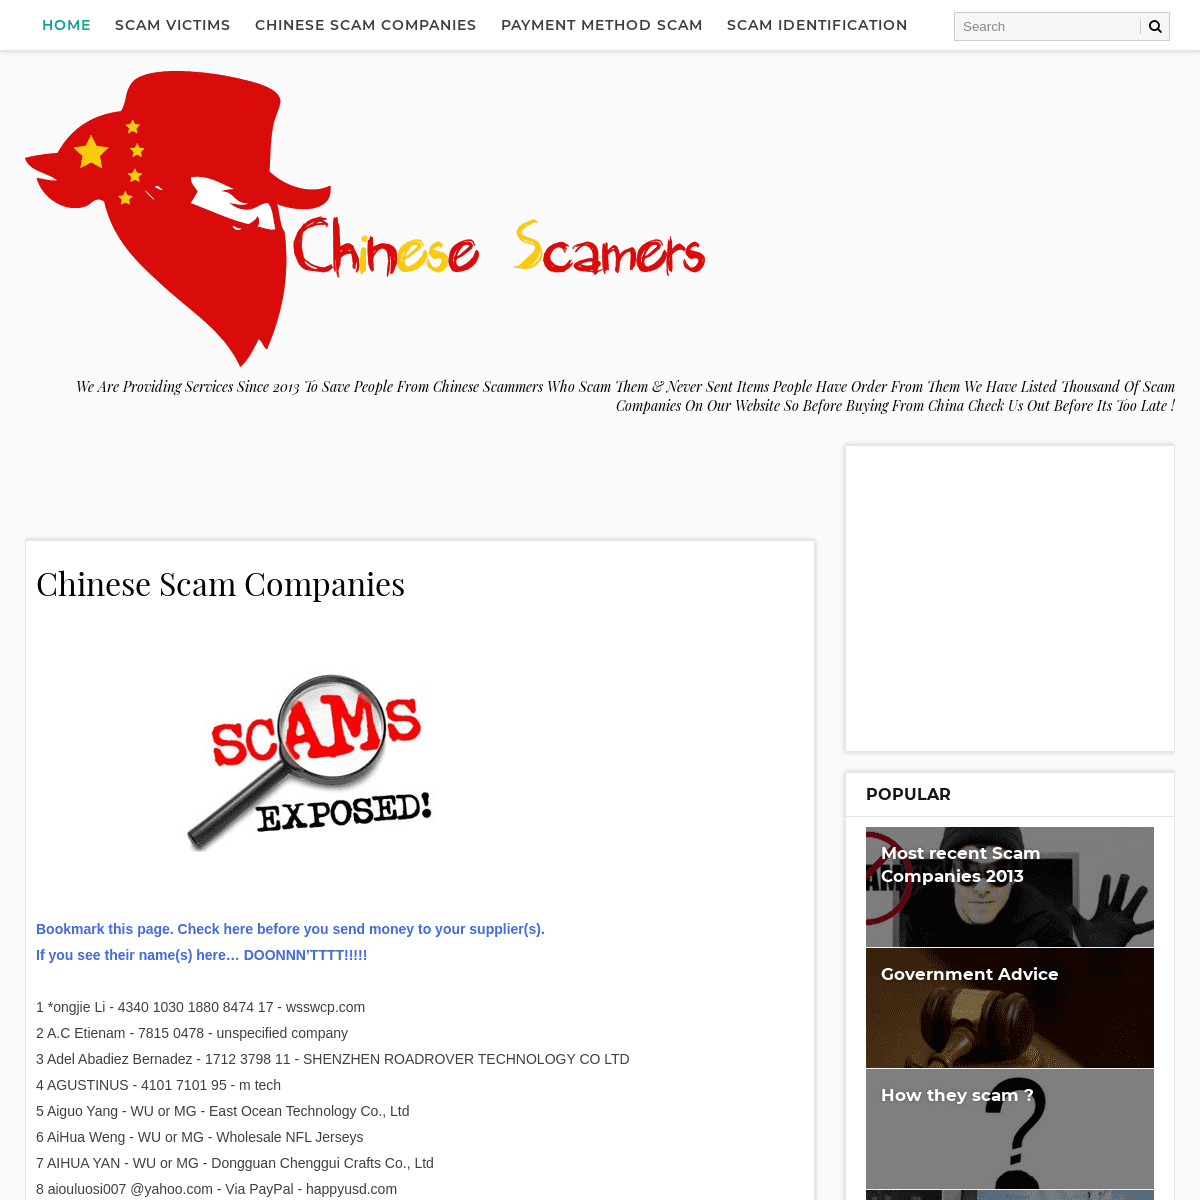 A complete backup of https://chinesescamers.blogspot.com/p/chinese-scam-companies.html